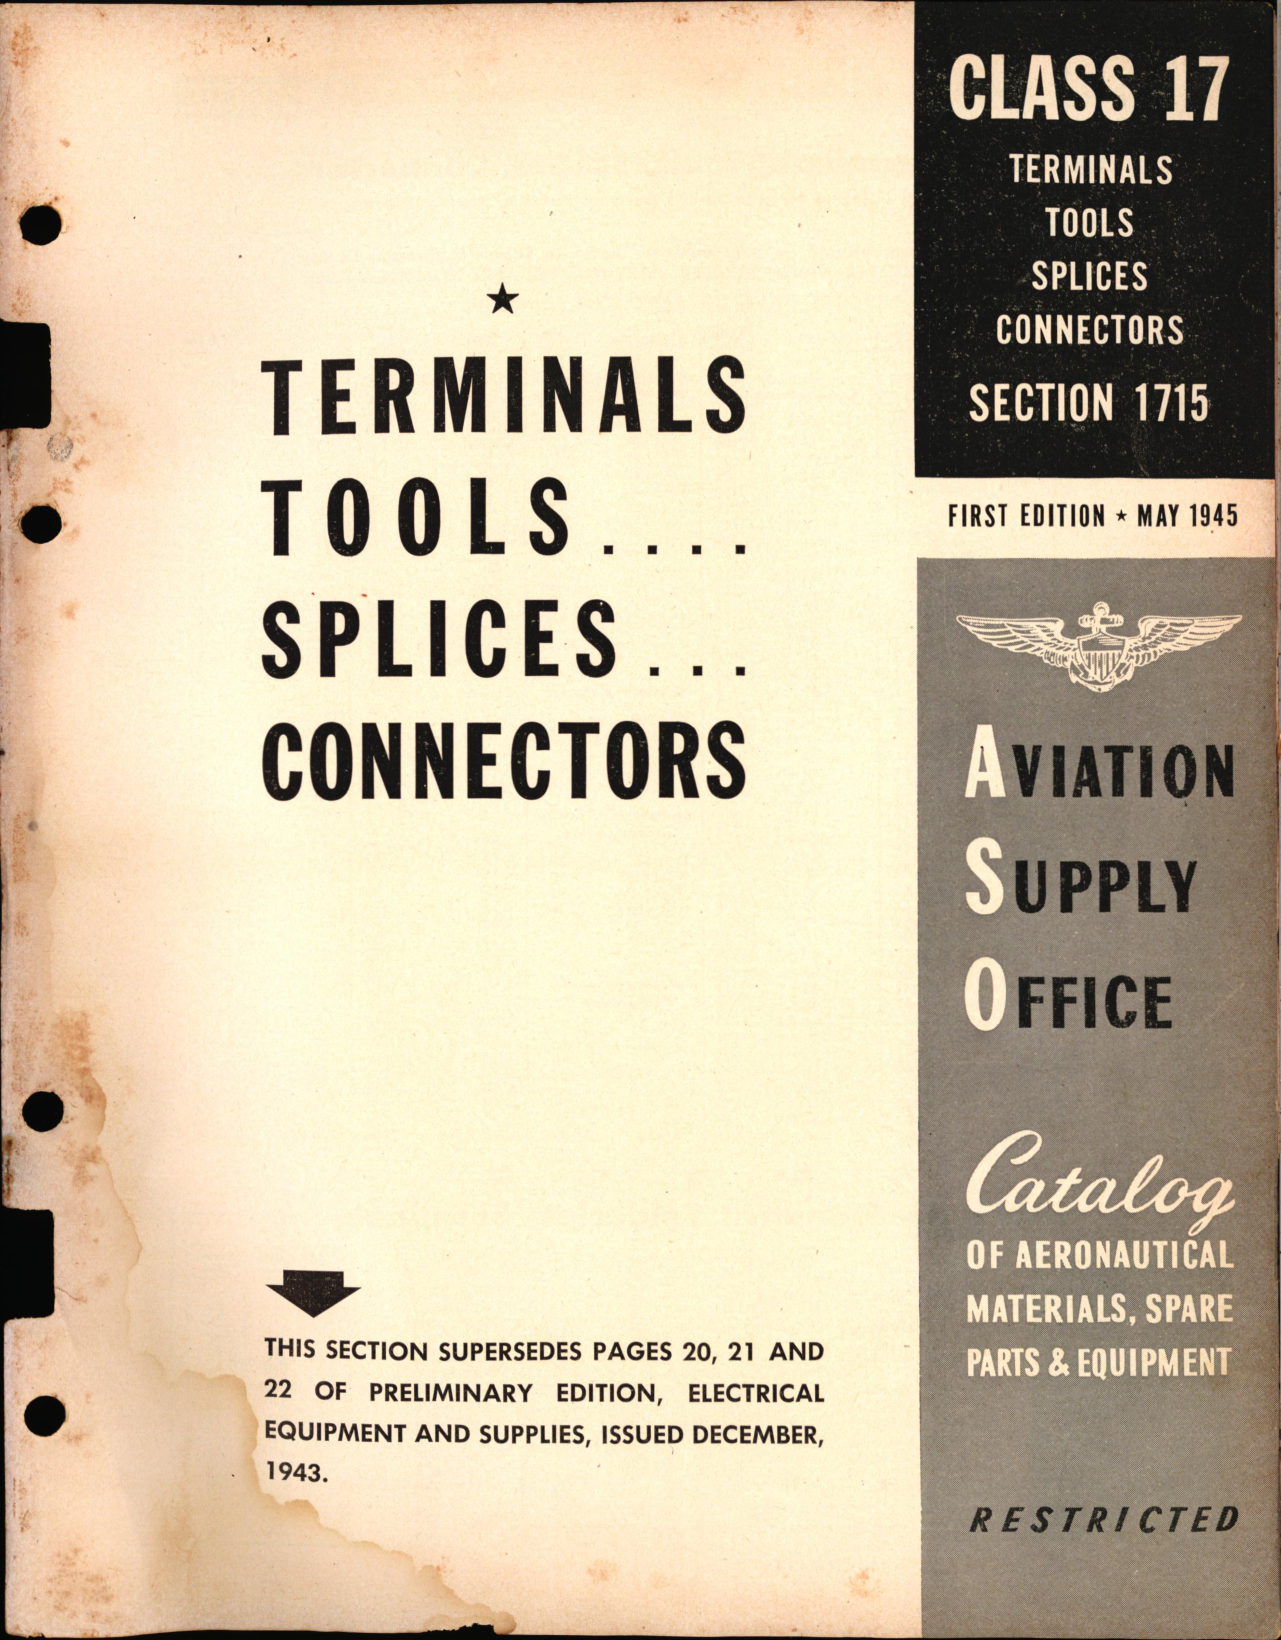 Sample page 1 from AirCorps Library document: Terminals, Tools, Splices, Connectors